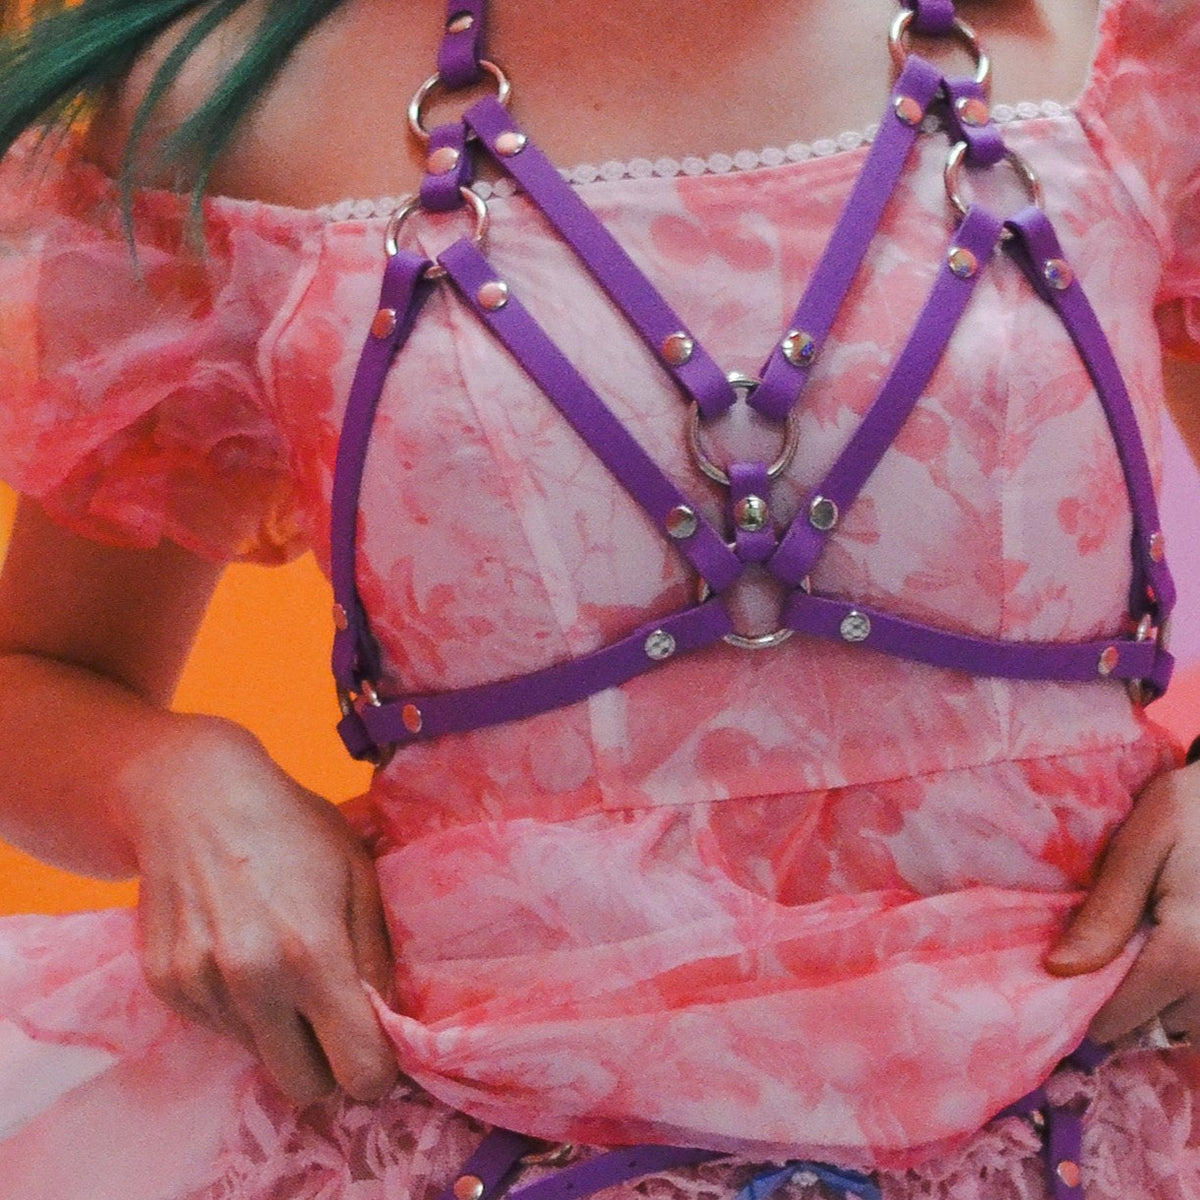 Closeup of a woman wearing pink with a purple bra top on top.